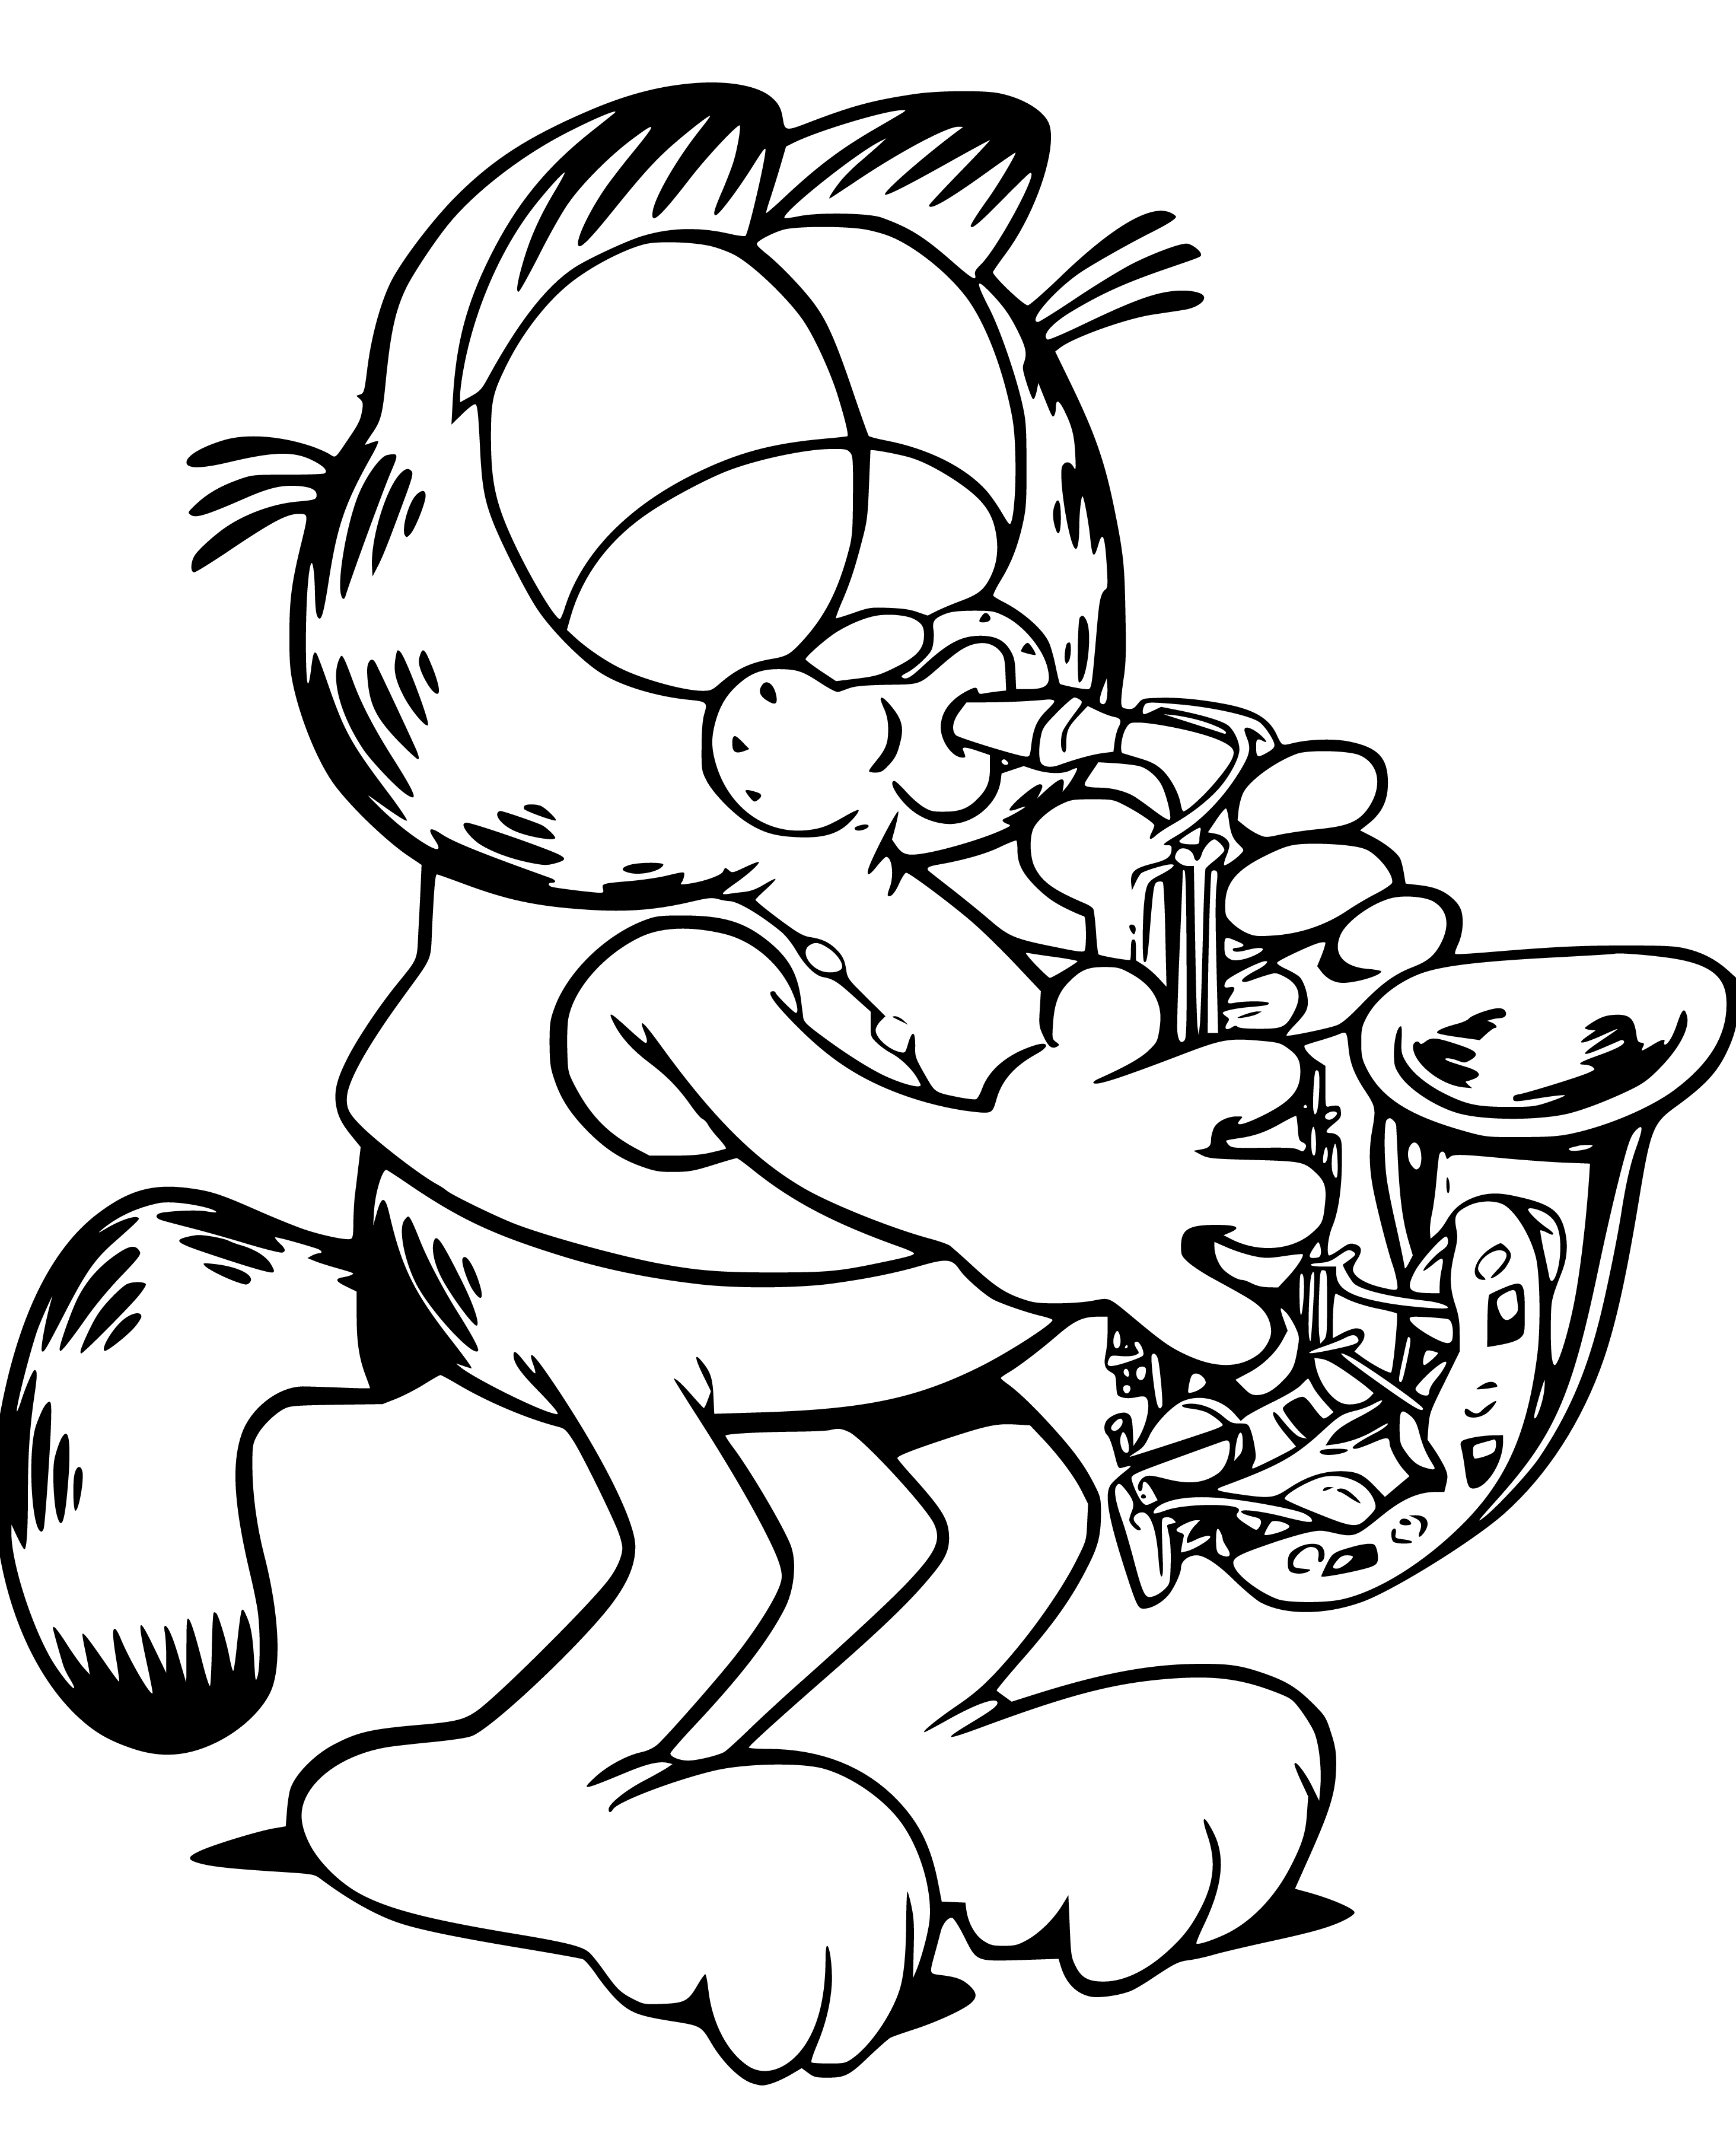 Printable Garfield as Musician Coloring Page for kids.